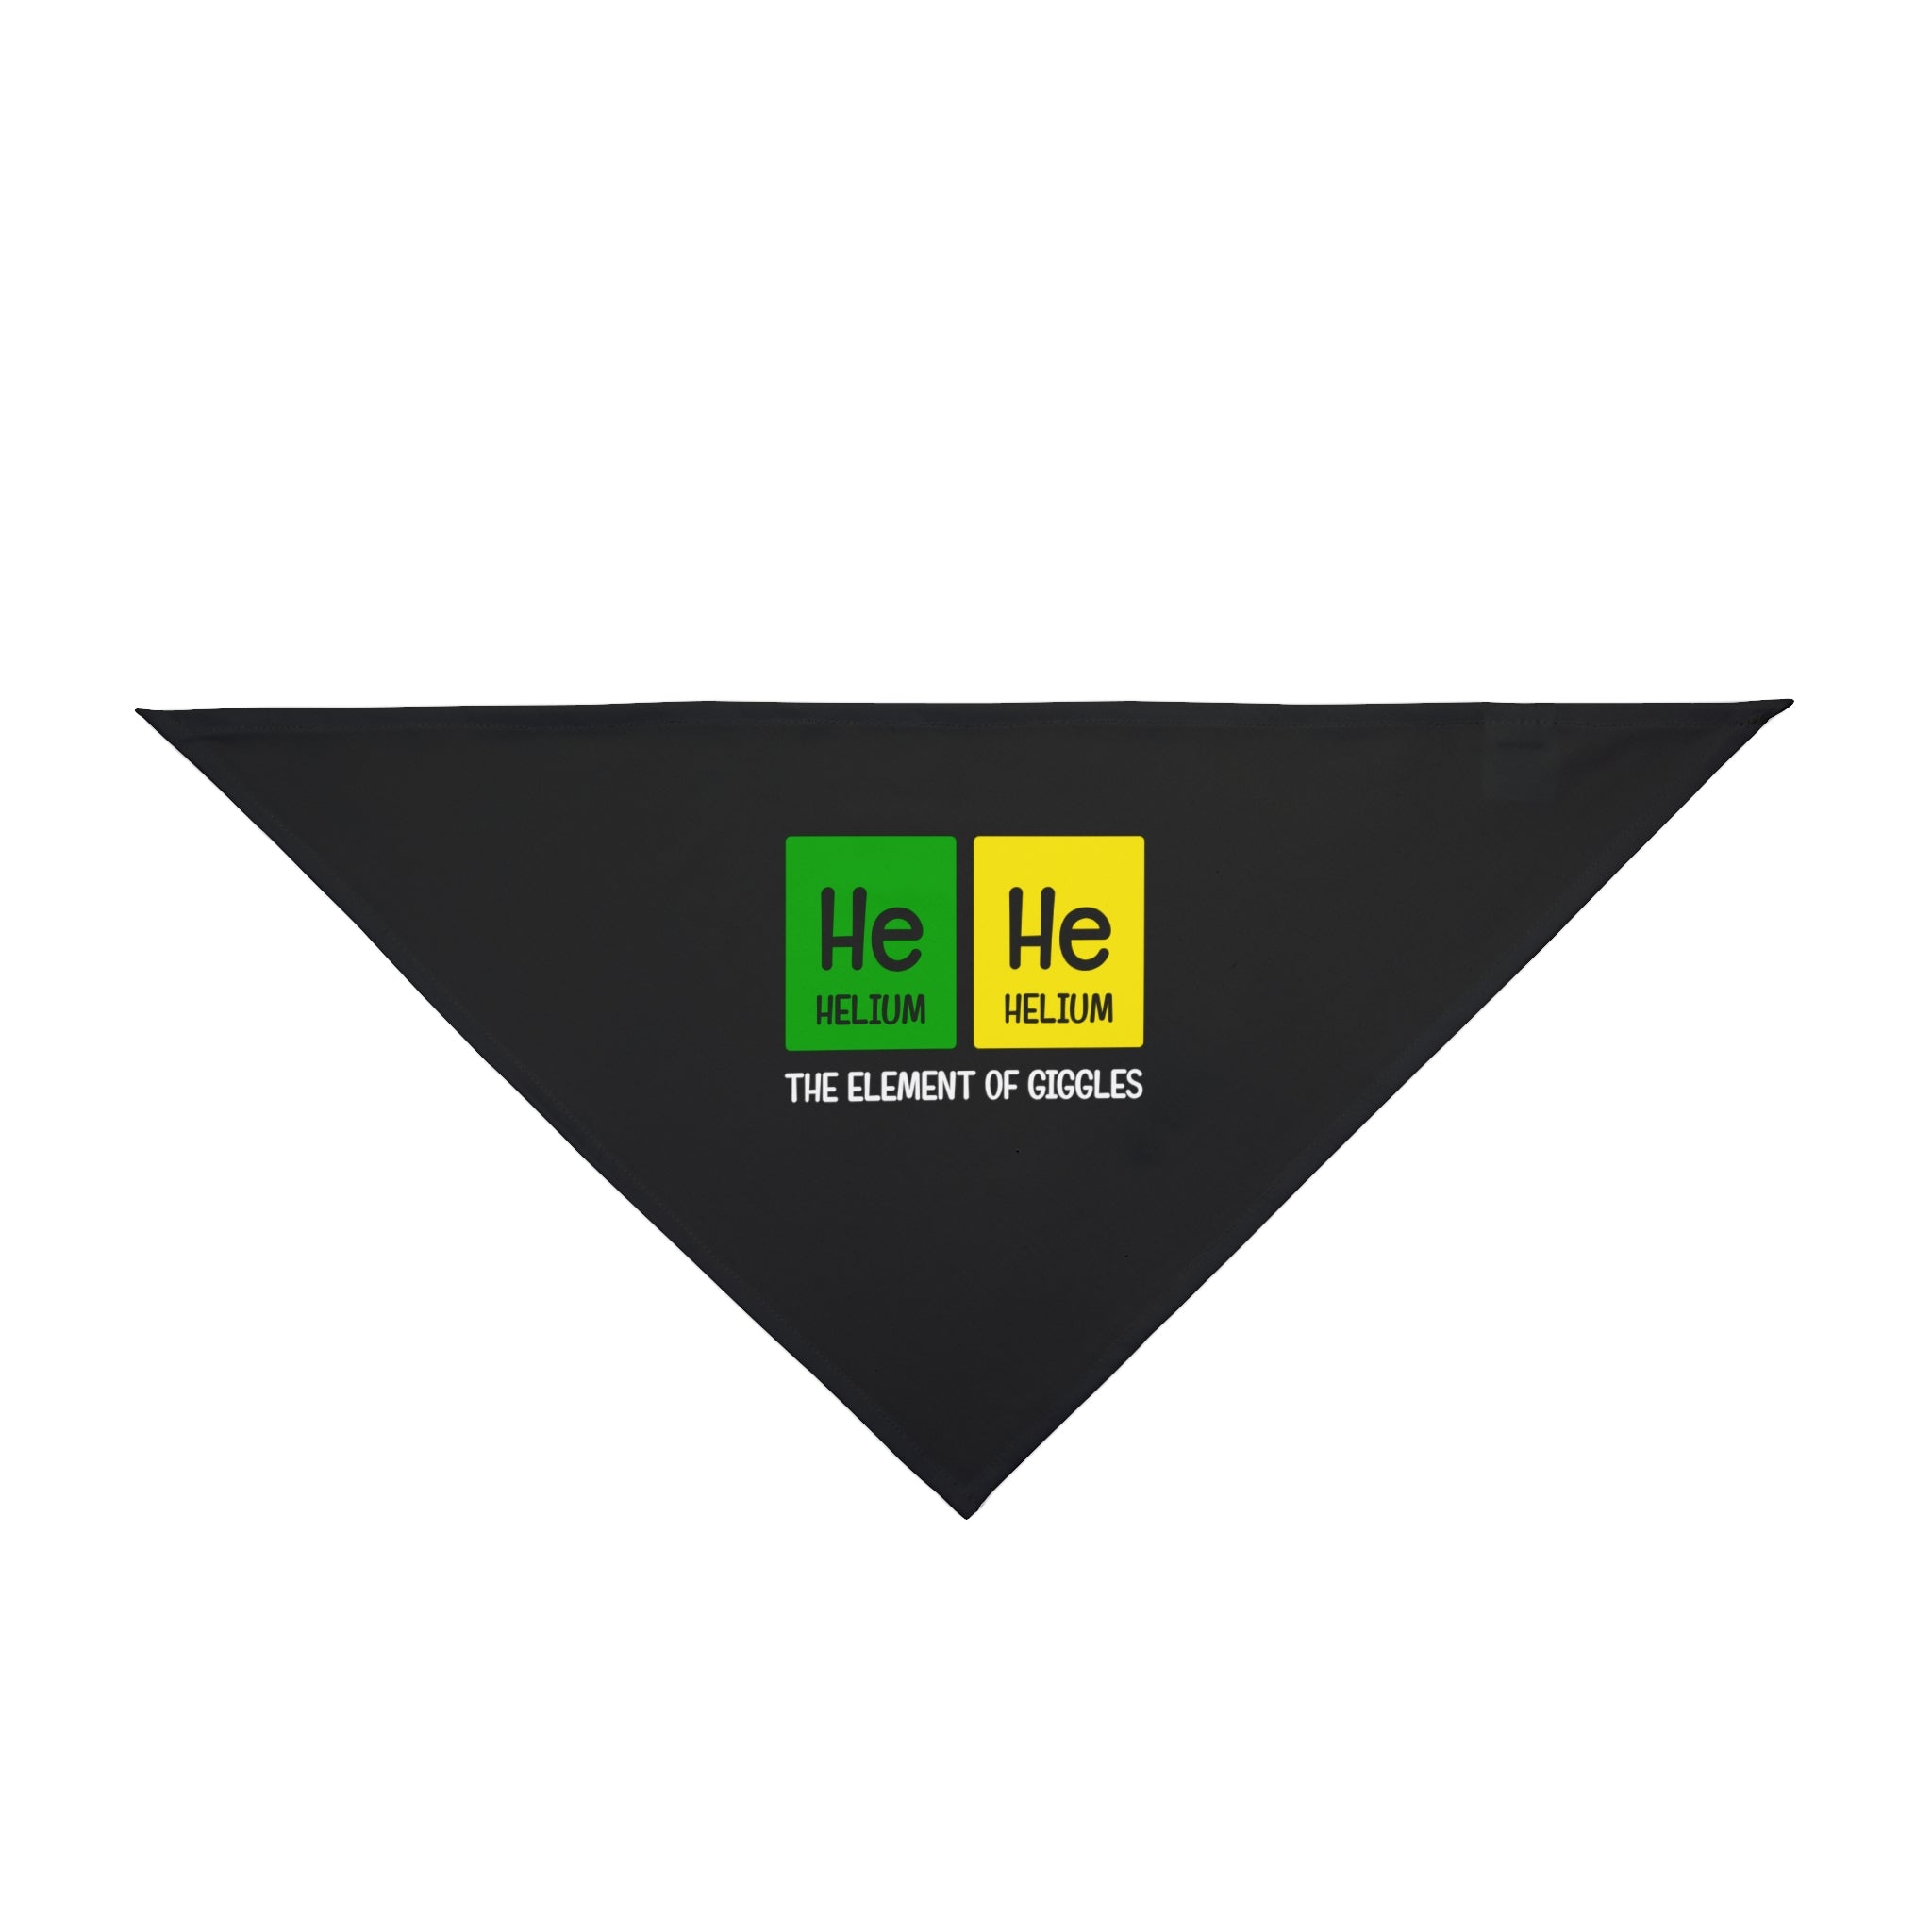 A black triangular pet bandana featuring a playful design with two periodic table helium element symbols and the text "He-He - Pet Bandana," crafted from irritation-free, soft-spun polyester.